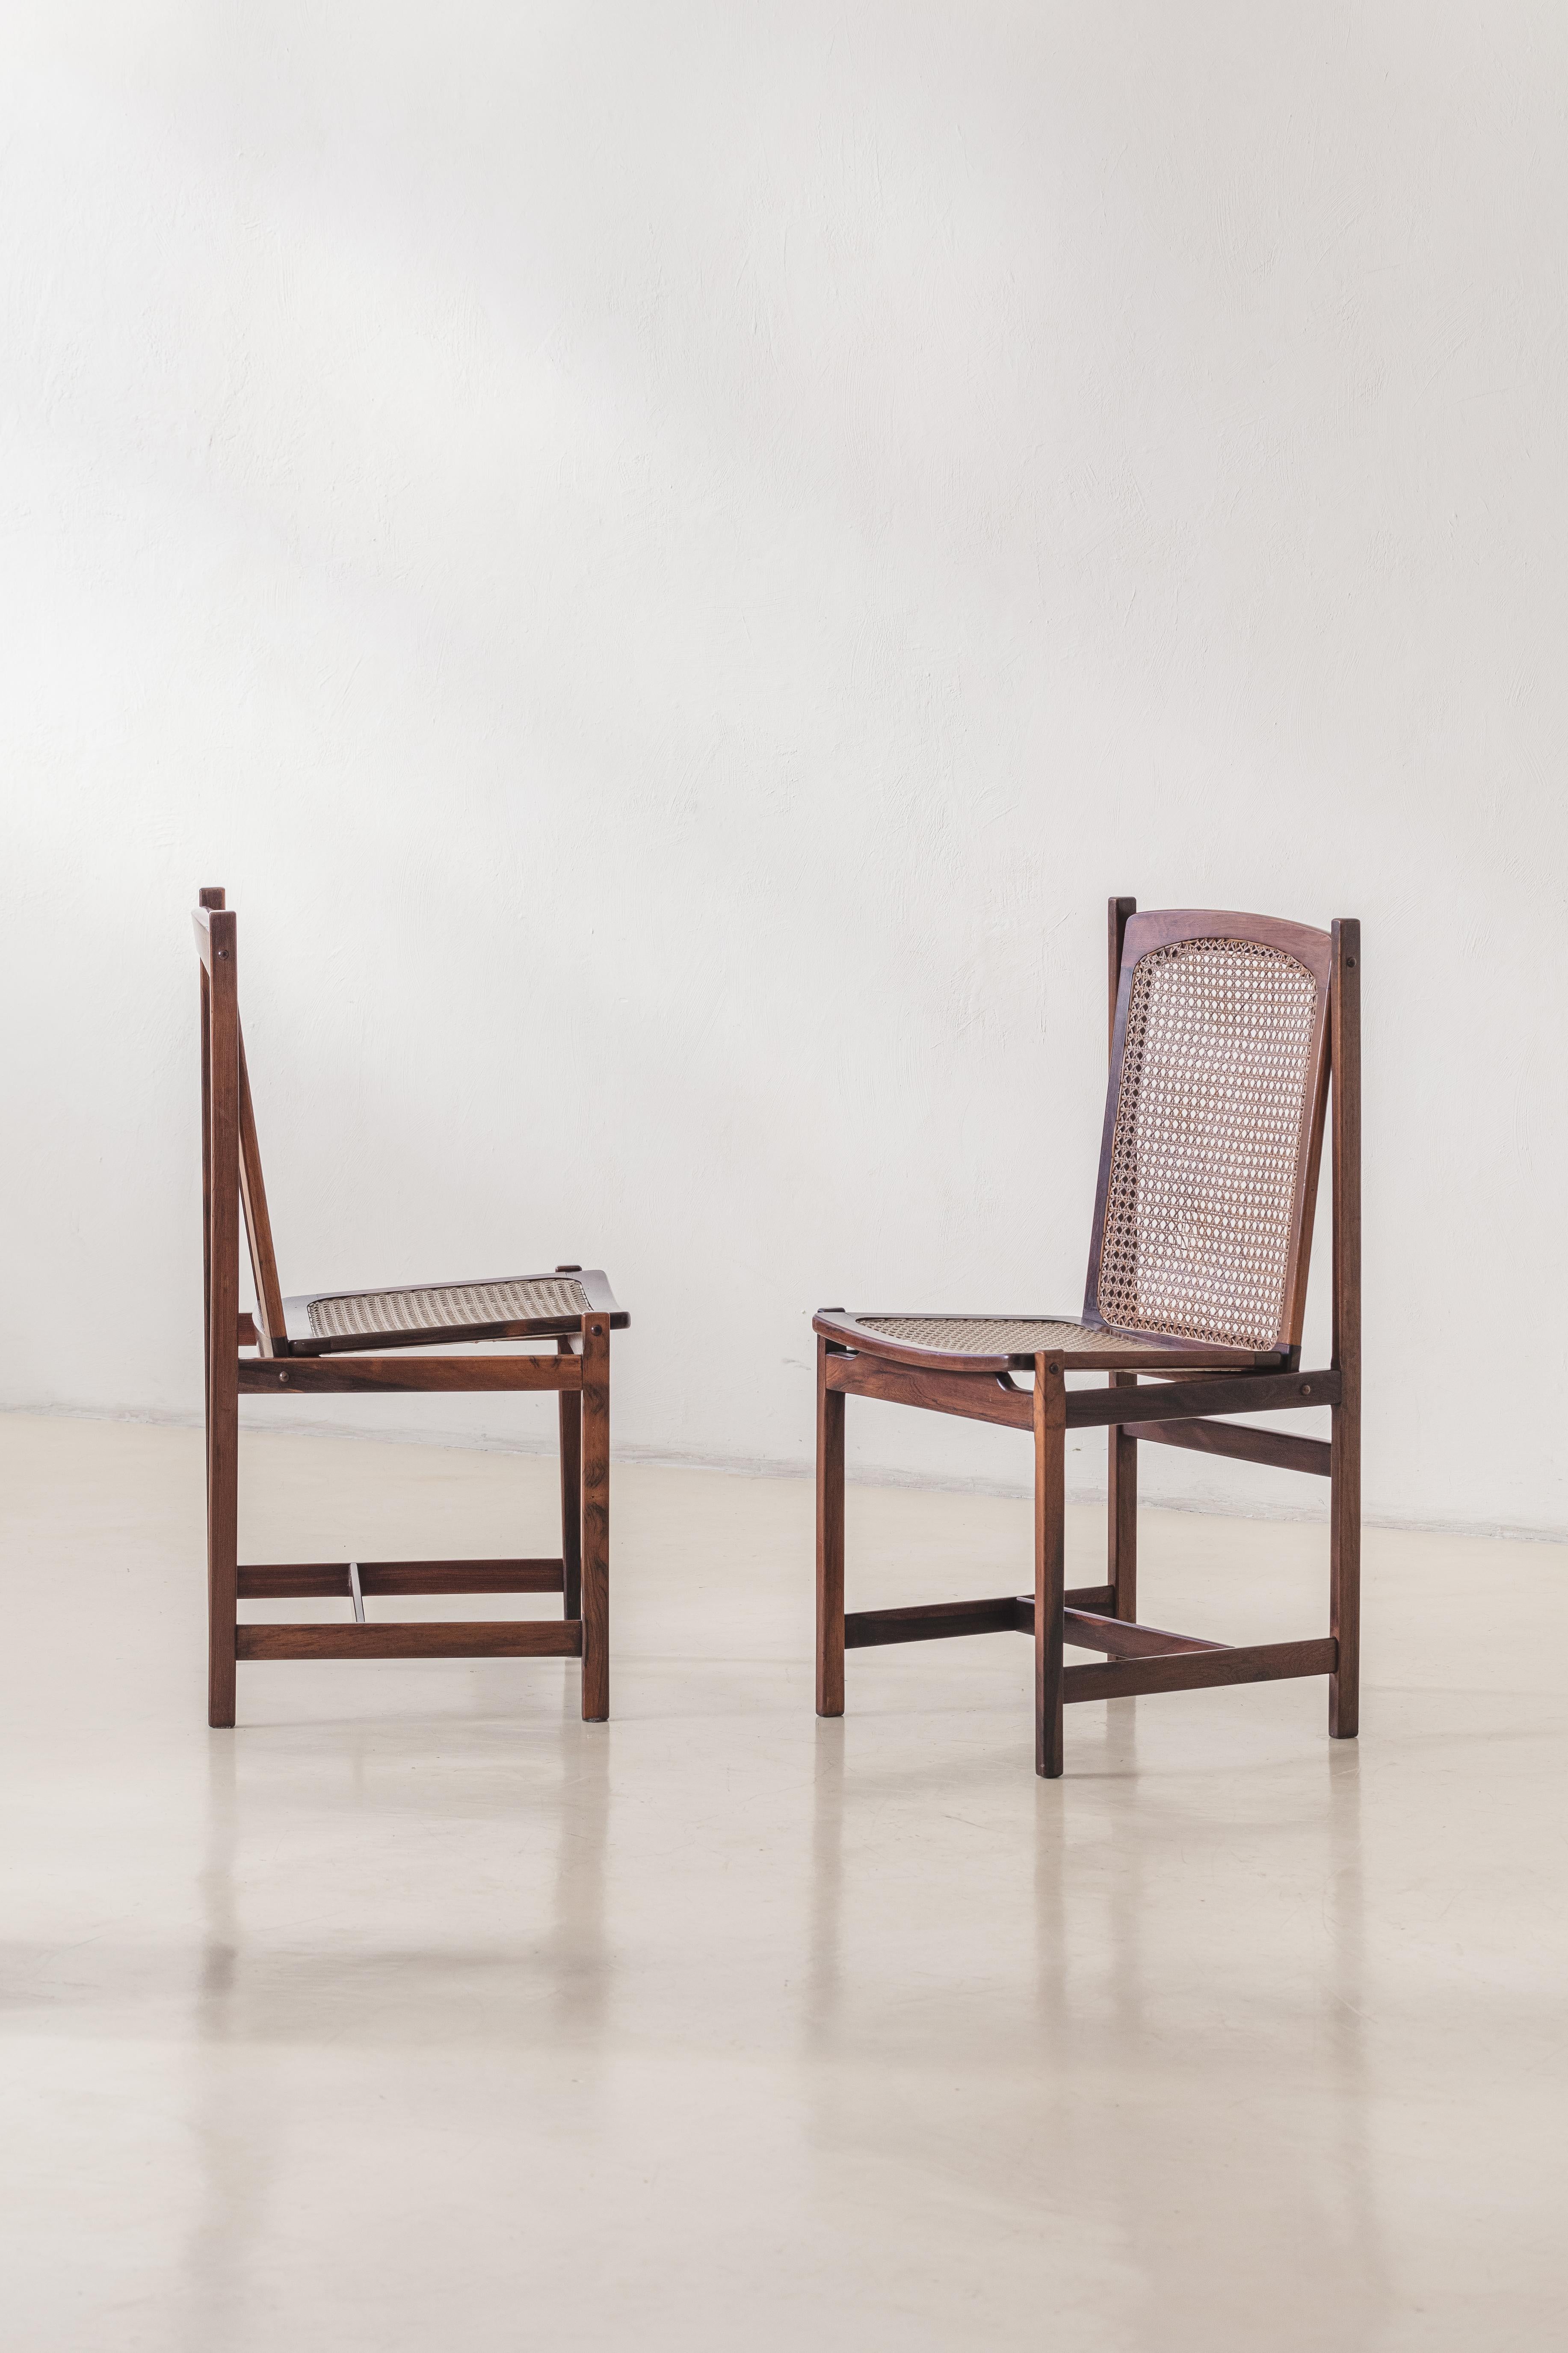 Celina Decorações set of six Dining Chairs, Rosewood and Cane, Mid-Century 1960s en vente 1